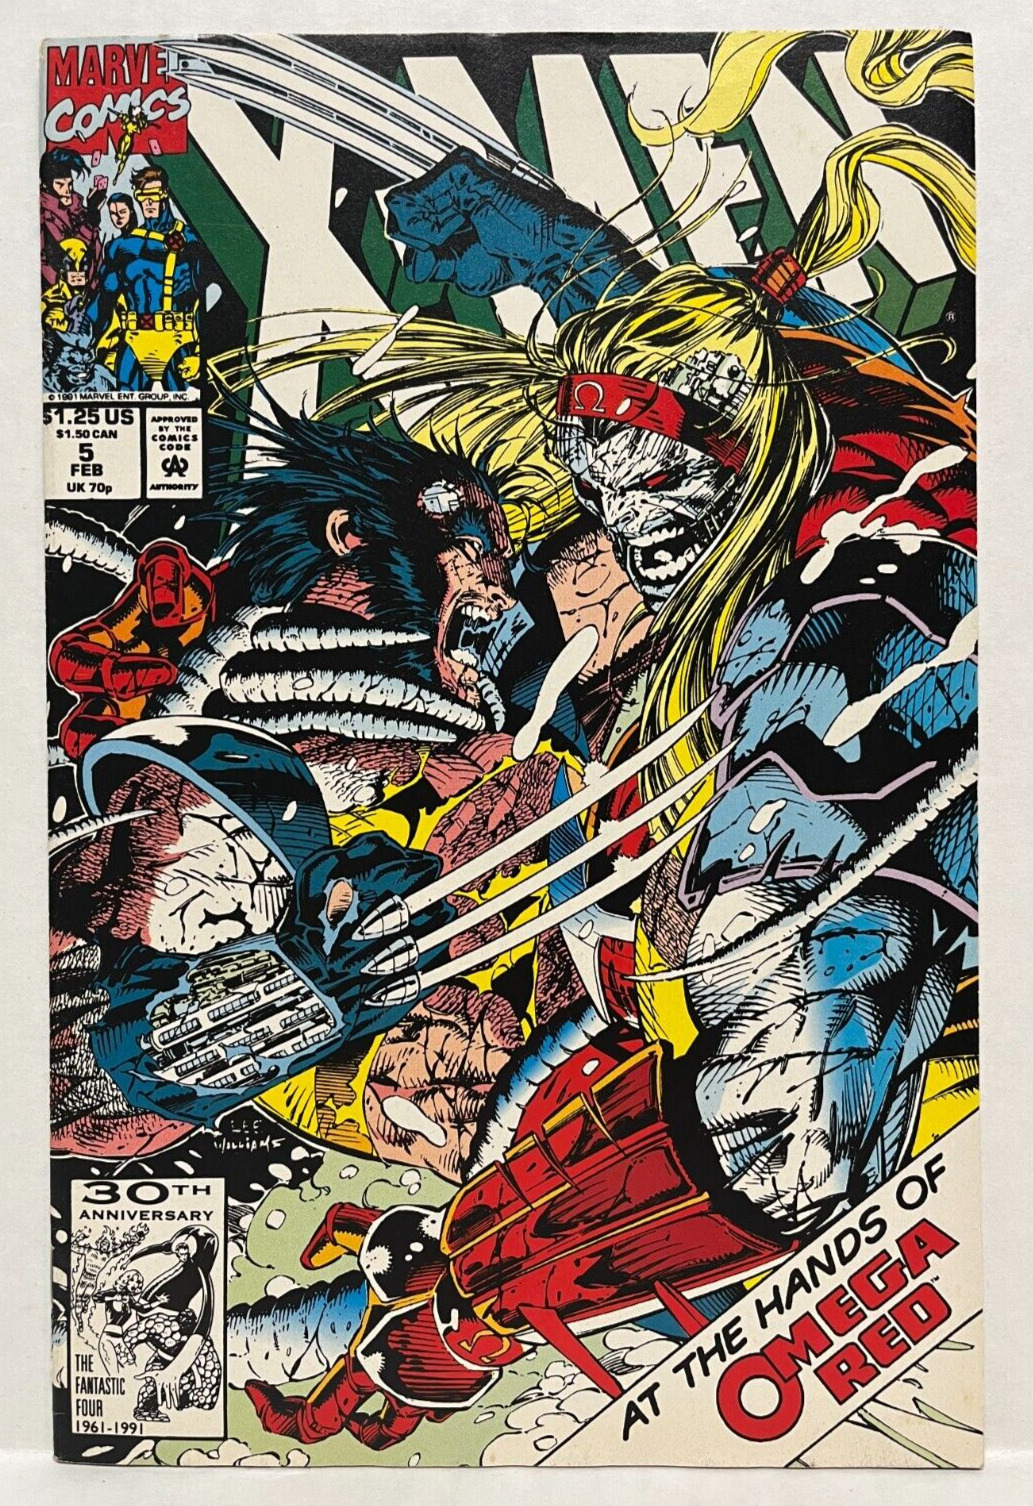 X-MEN AT THE HANDS OF OMEGA RED Vol. 1 No. 5 February 1992 / FULL COLOR / MARVEL